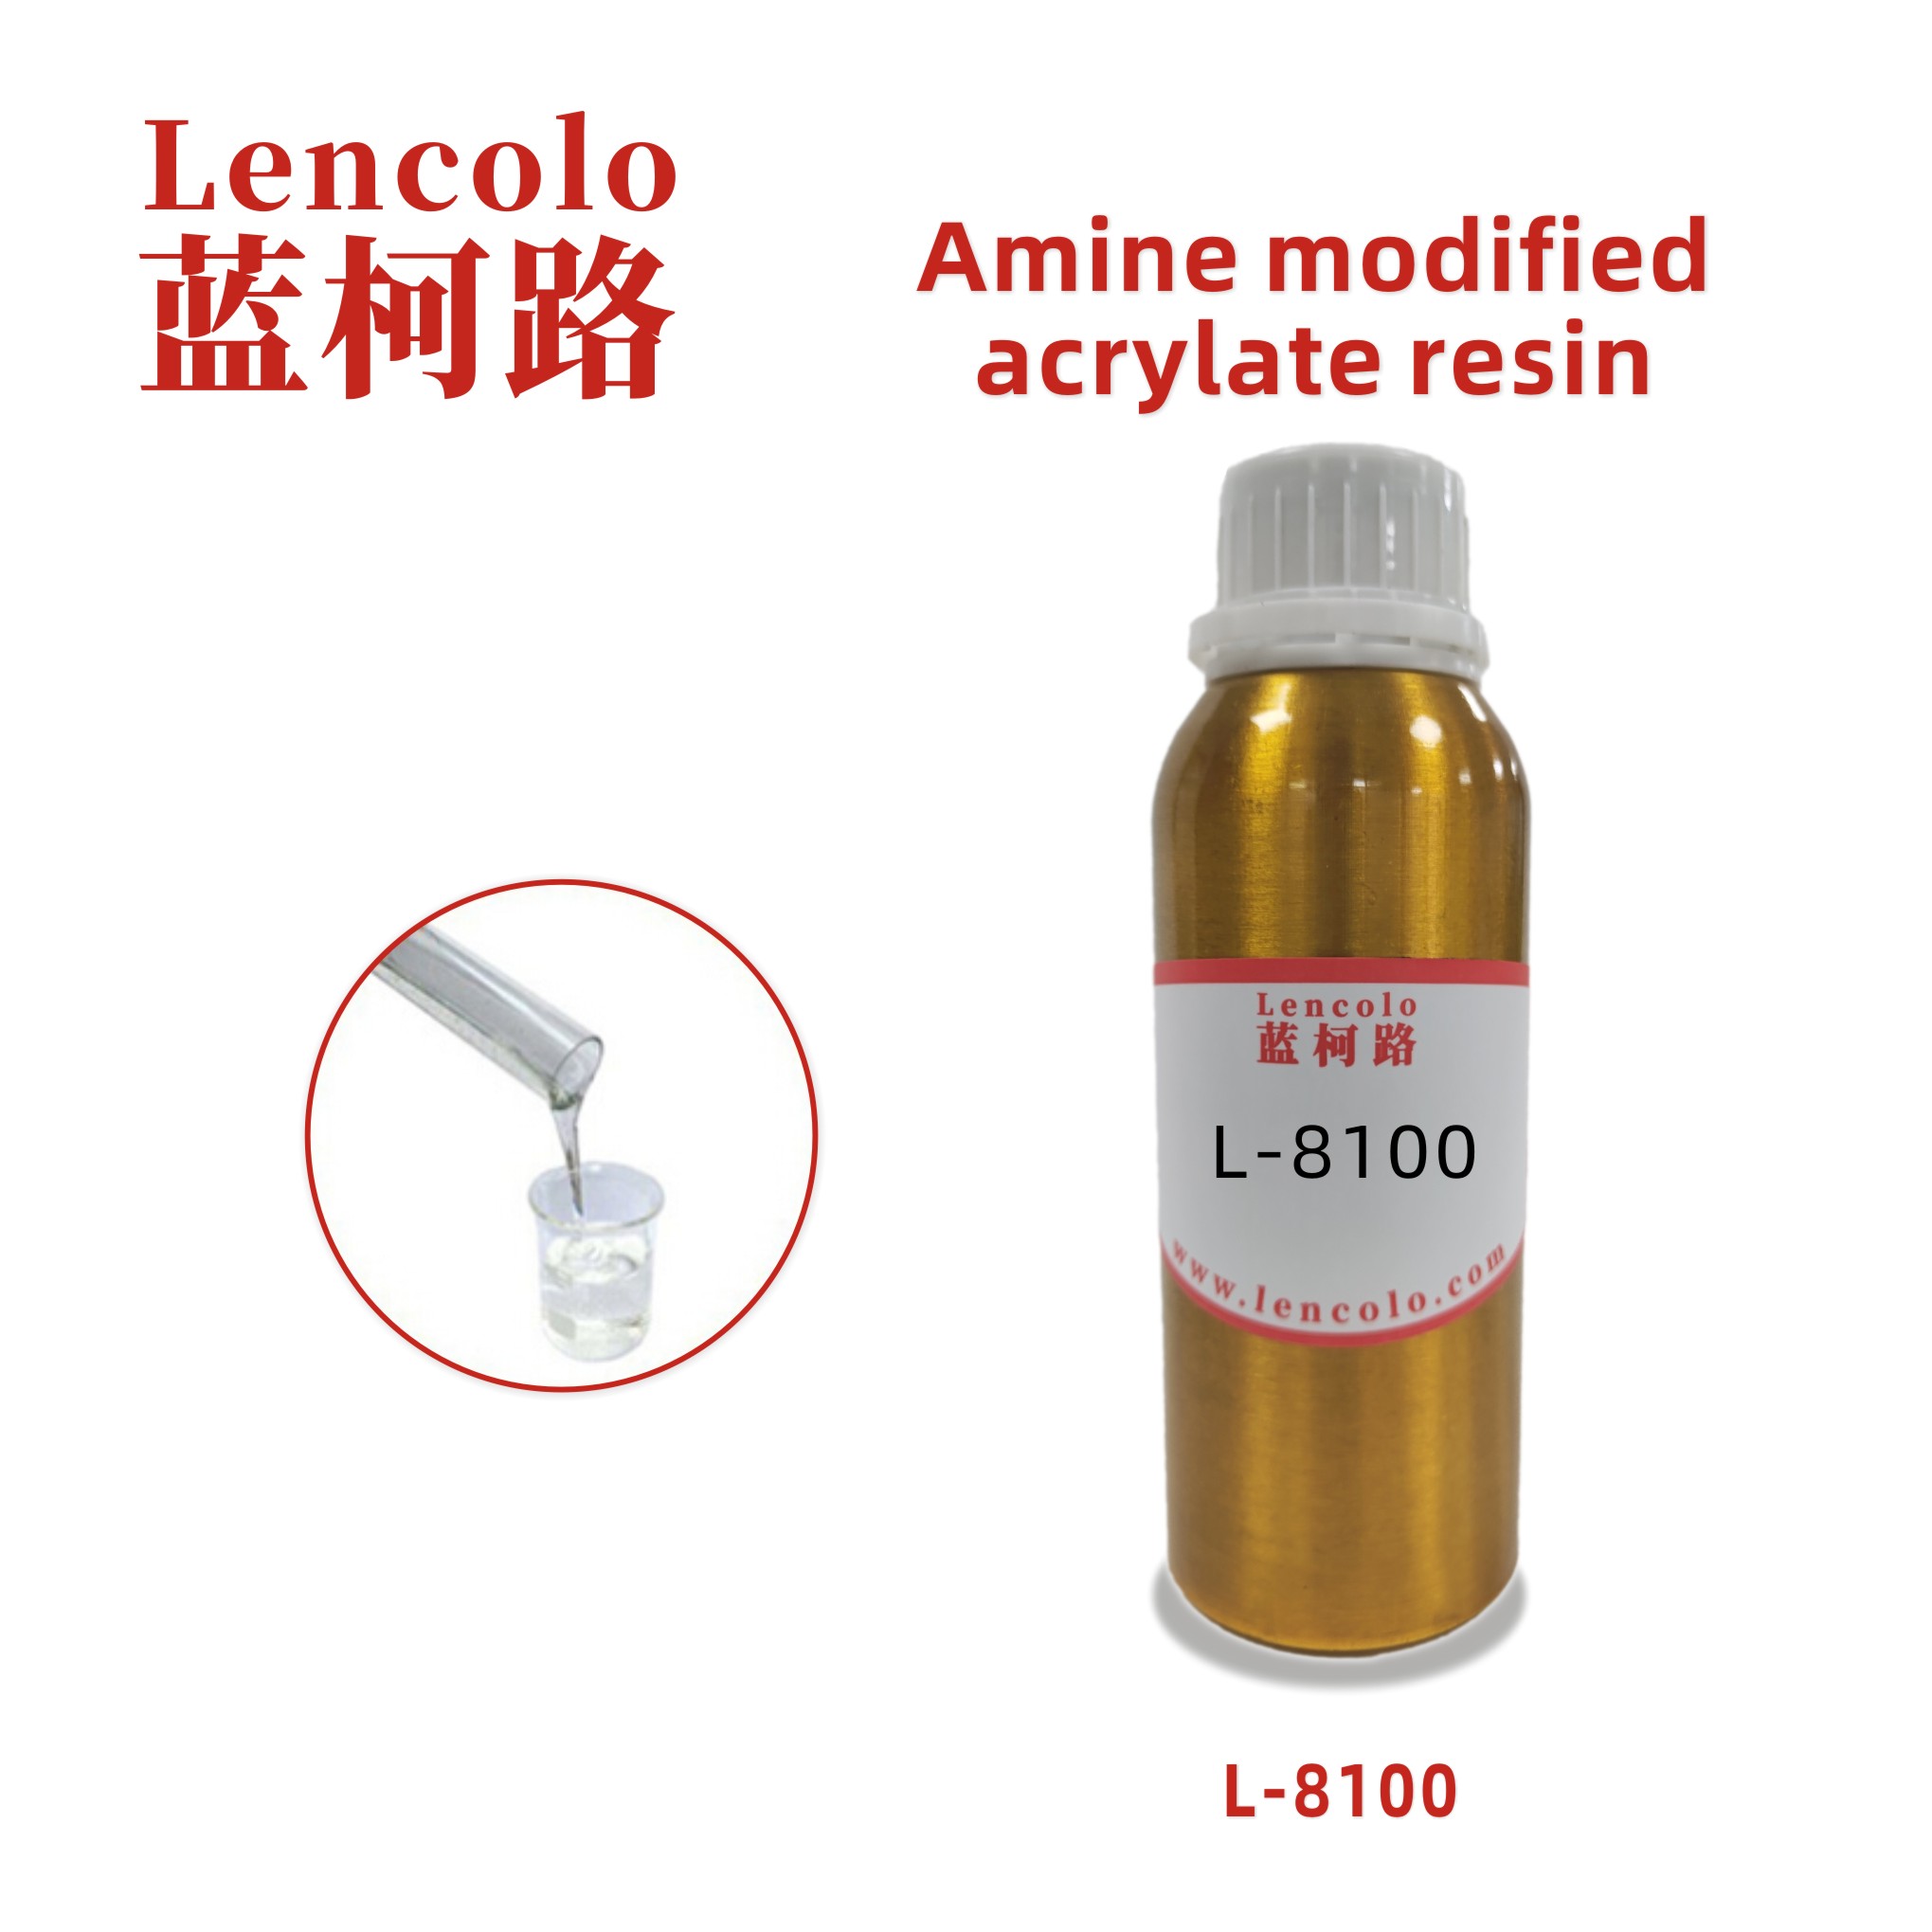 L-8100  Amine modified acrylate resin good adhesion-promoting for metal surfaces